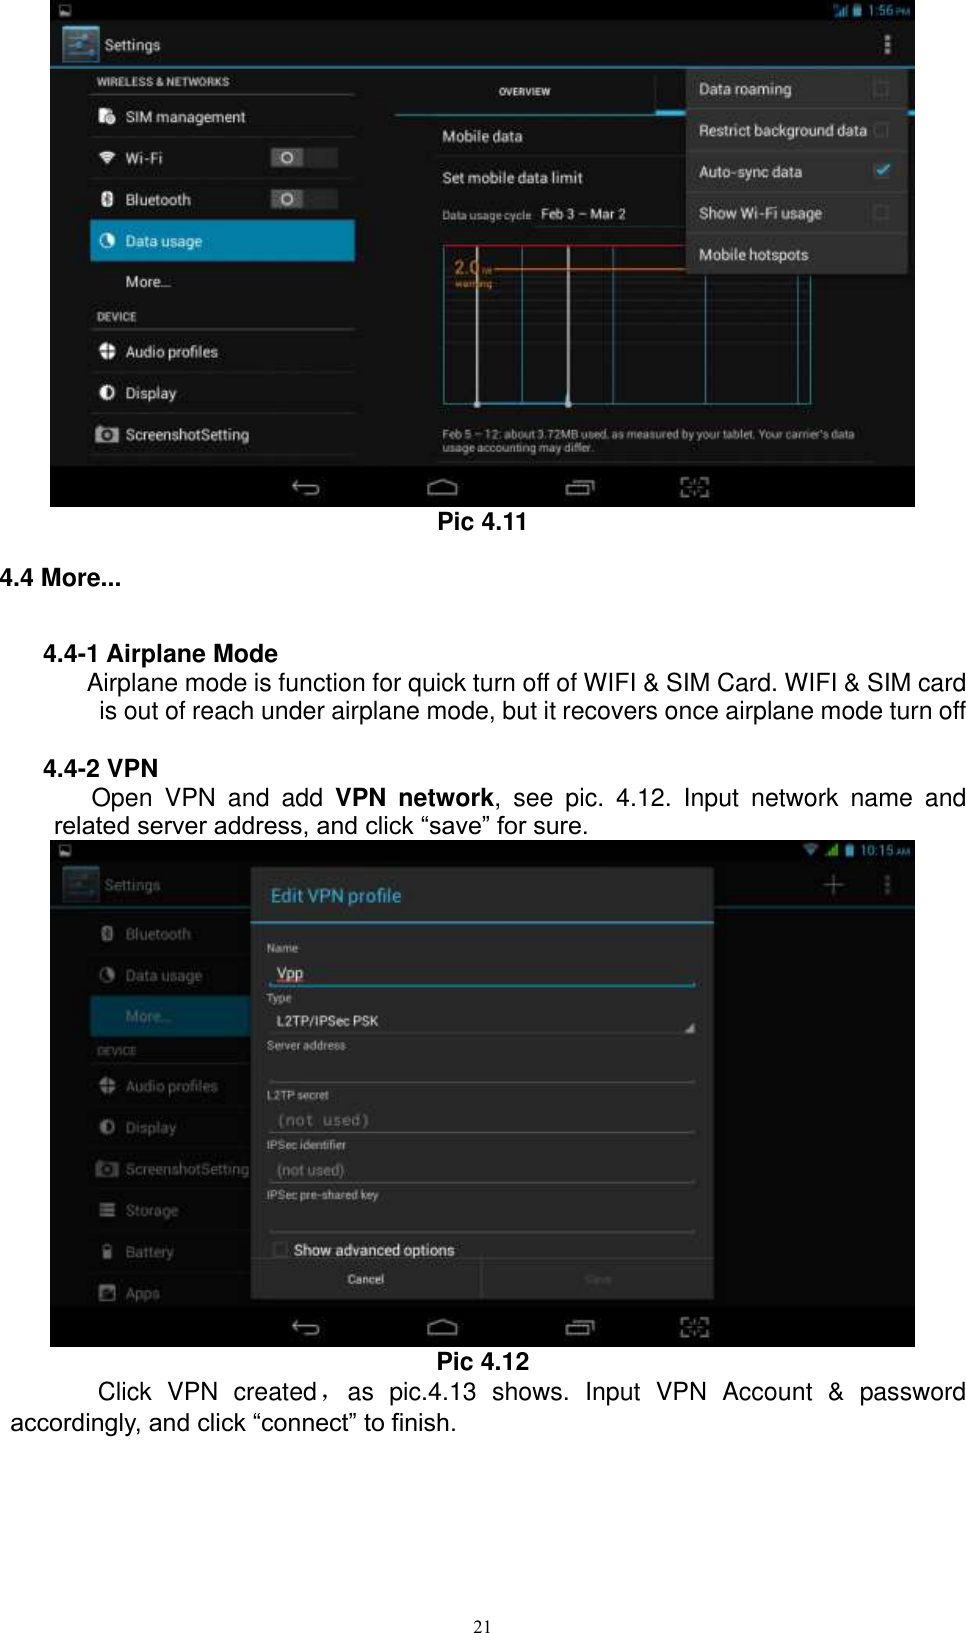      21  Pic 4.11 4.4 More... 4.4-1 Airplane Mode Airplane mode is function for quick turn off of WIFI &amp; SIM Card. WIFI &amp; SIM card is out of reach under airplane mode, but it recovers once airplane mode turn off  4.4-2 VPN Open  VPN  and  add  VPN  network,  see  pic.  4.12.  Input  network  name  and related server address, and click “save” for sure.    Pic 4.12     Click  VPN  created，as  pic.4.13  shows.  Input  VPN  Account  &amp;  password accordingly, and click “connect” to finish.   